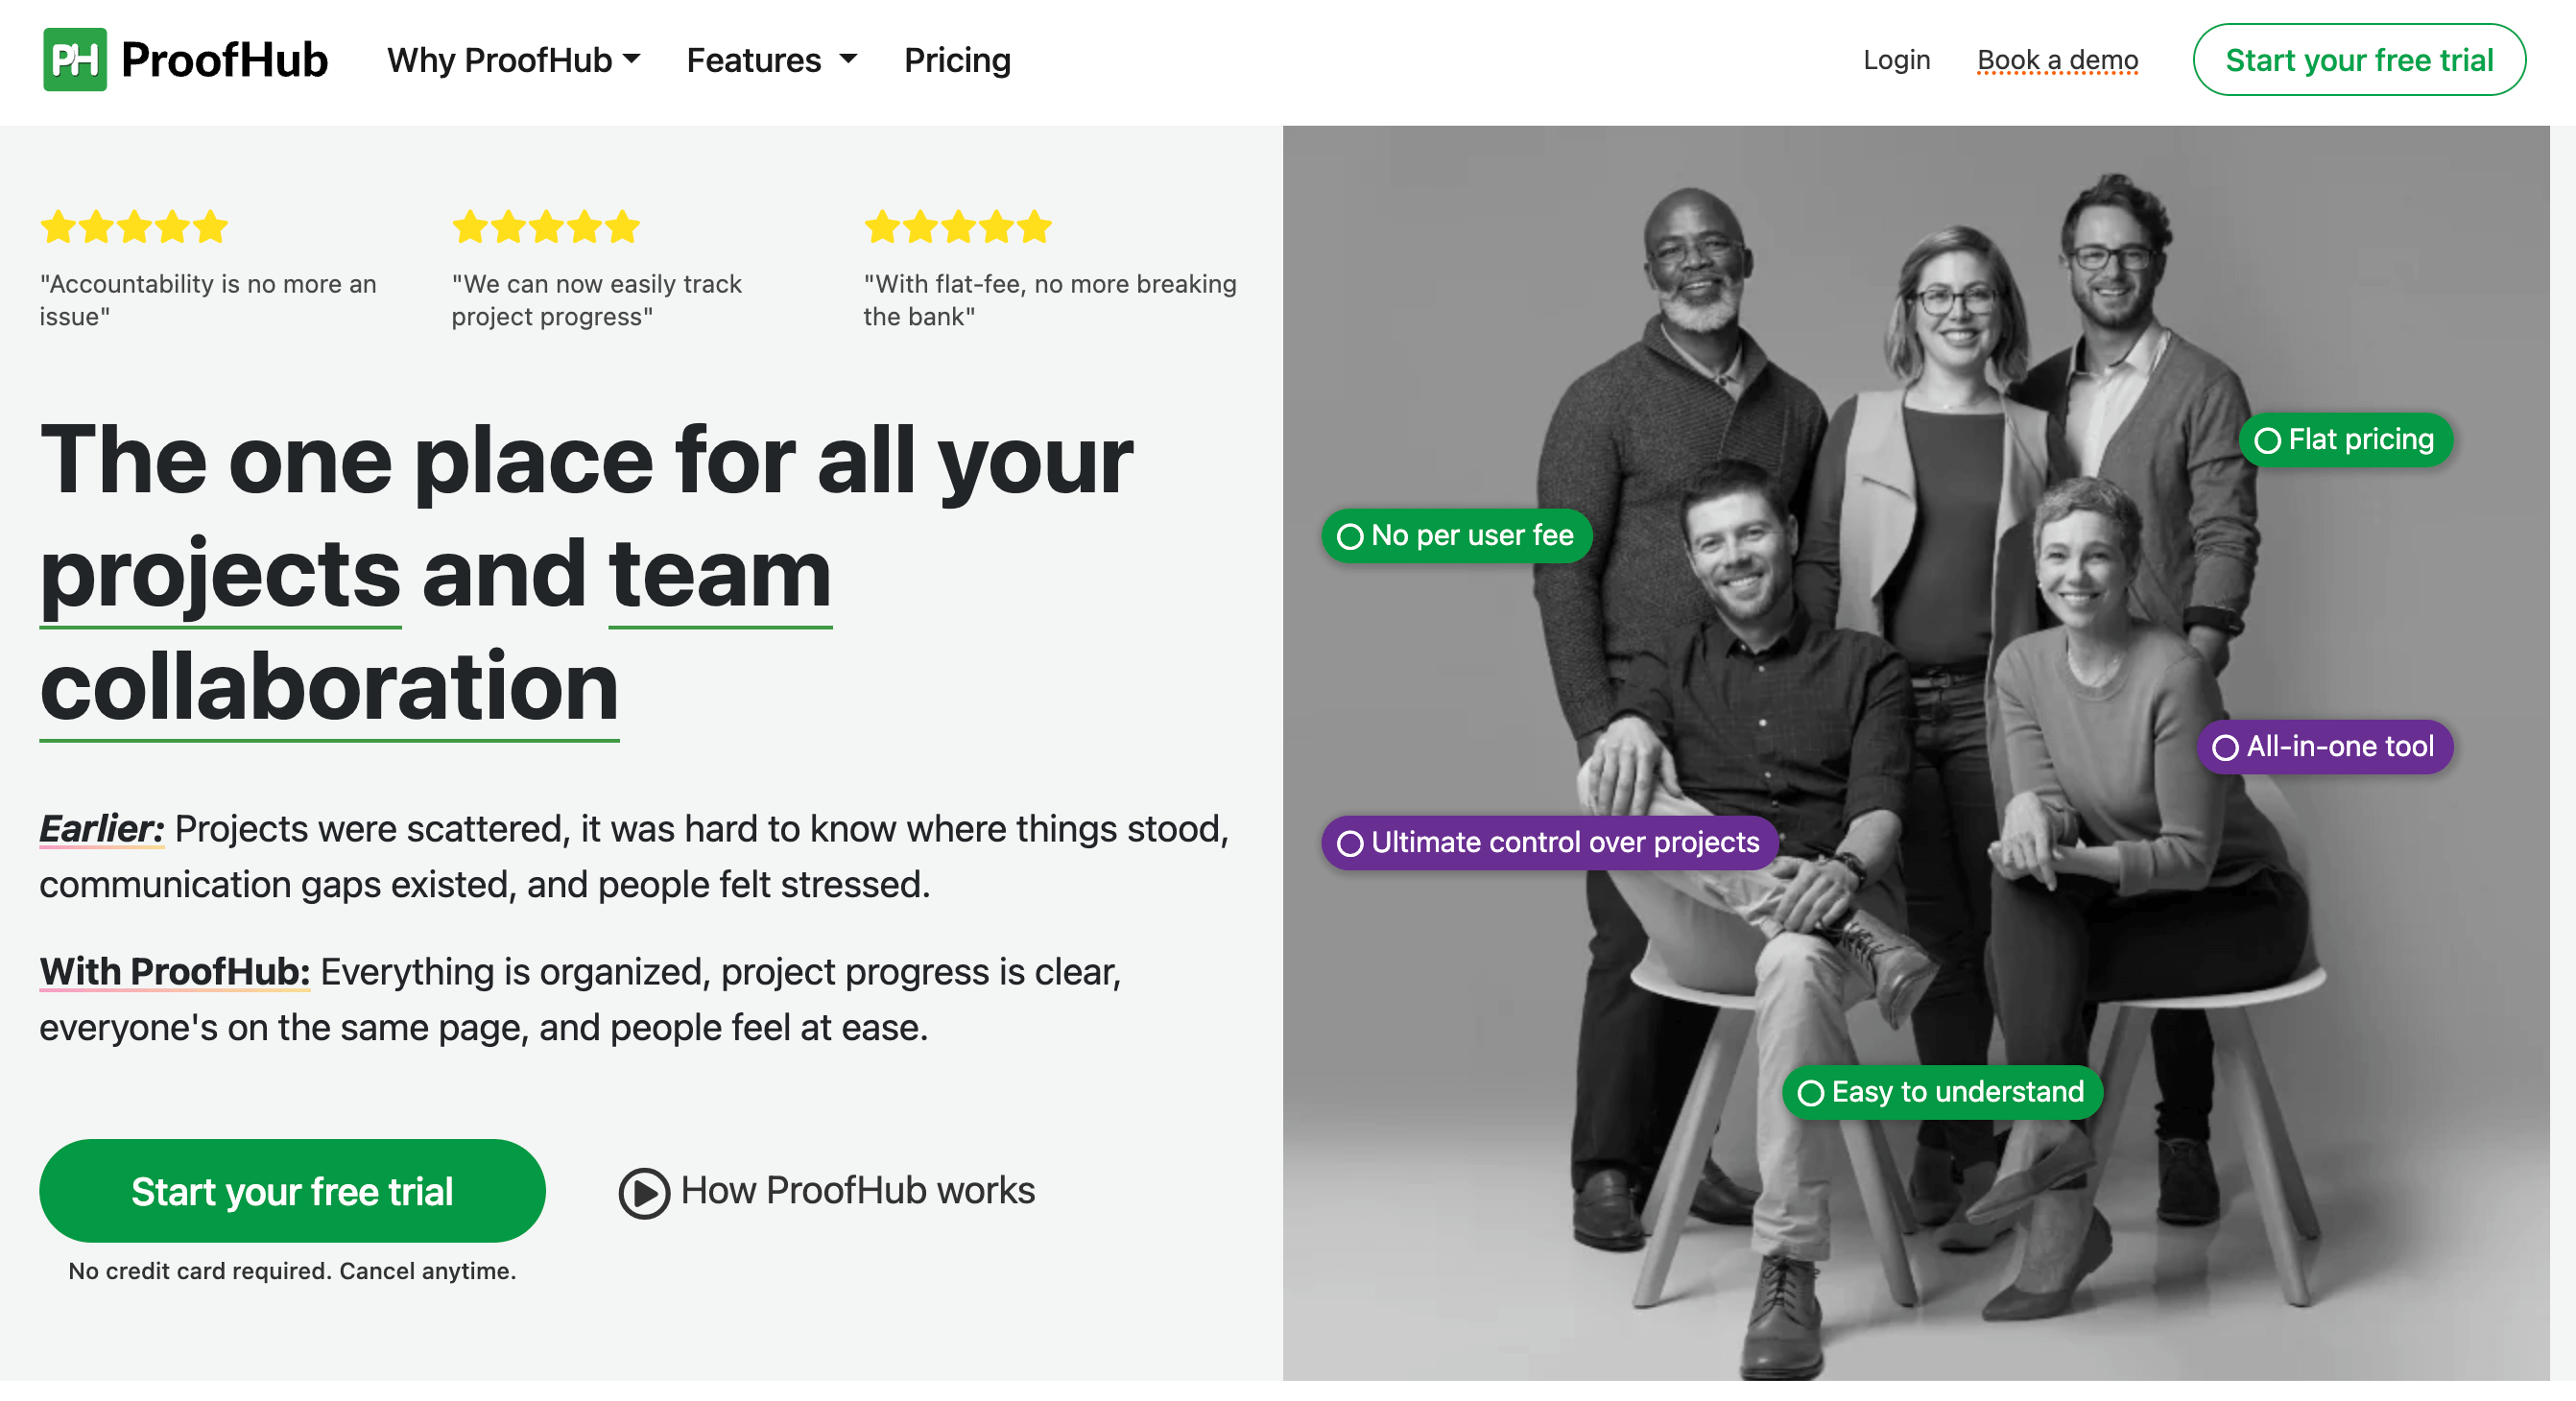 ProofHub homepage showcasing it as the one place for all projects and team collaboration.